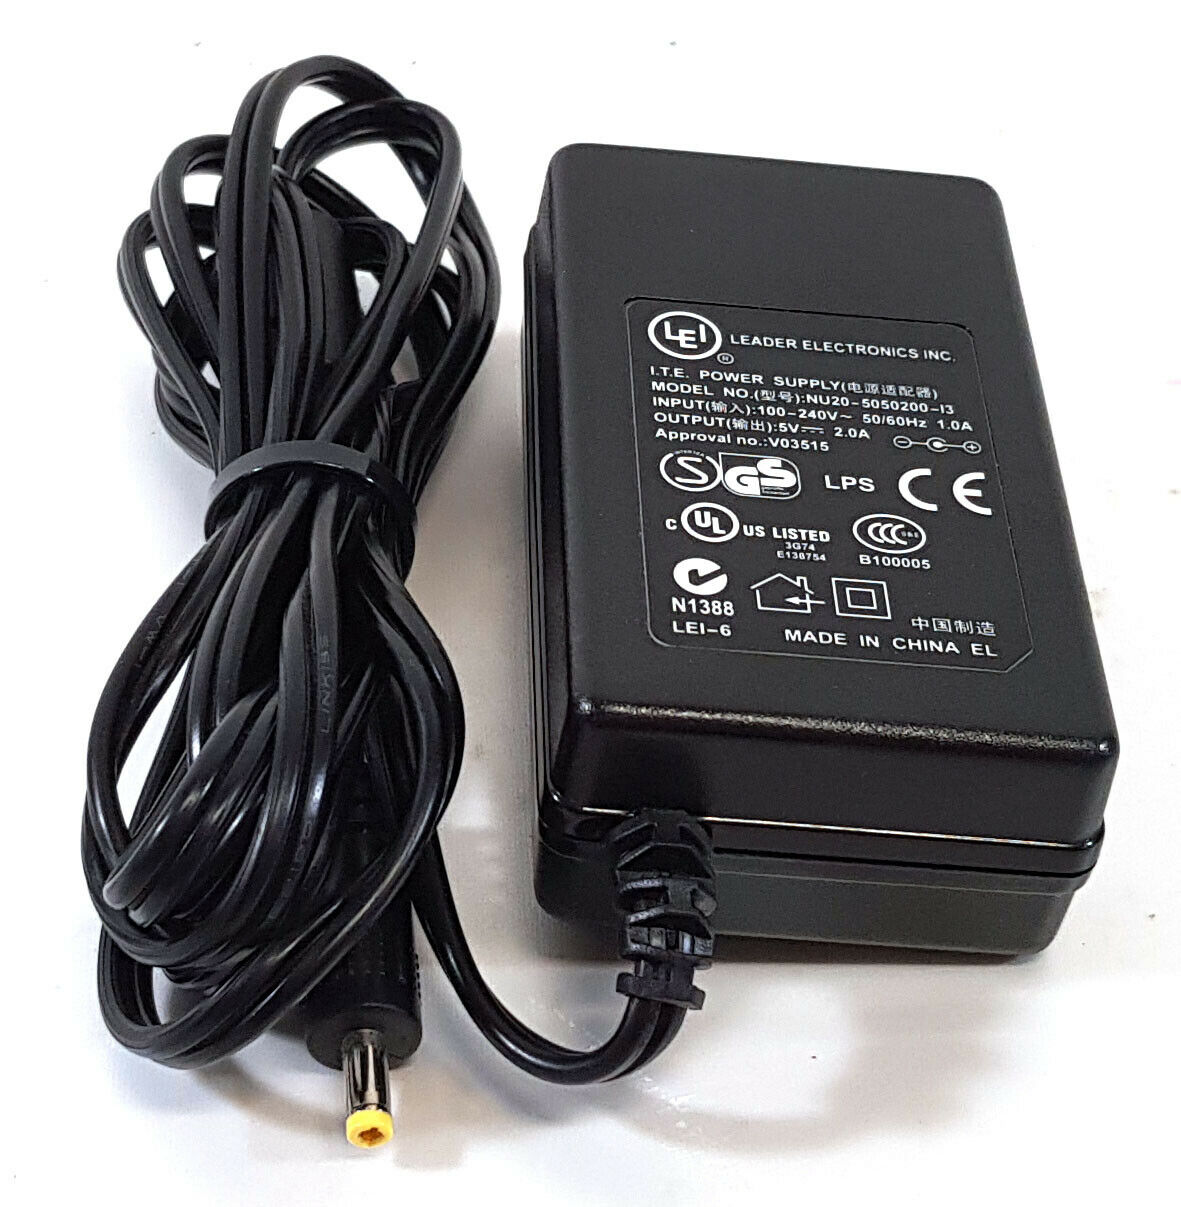 NEW LEI AC ADAPTER NU20-5050200-13 5V 2.0A POWER SUPPLY CHARGER